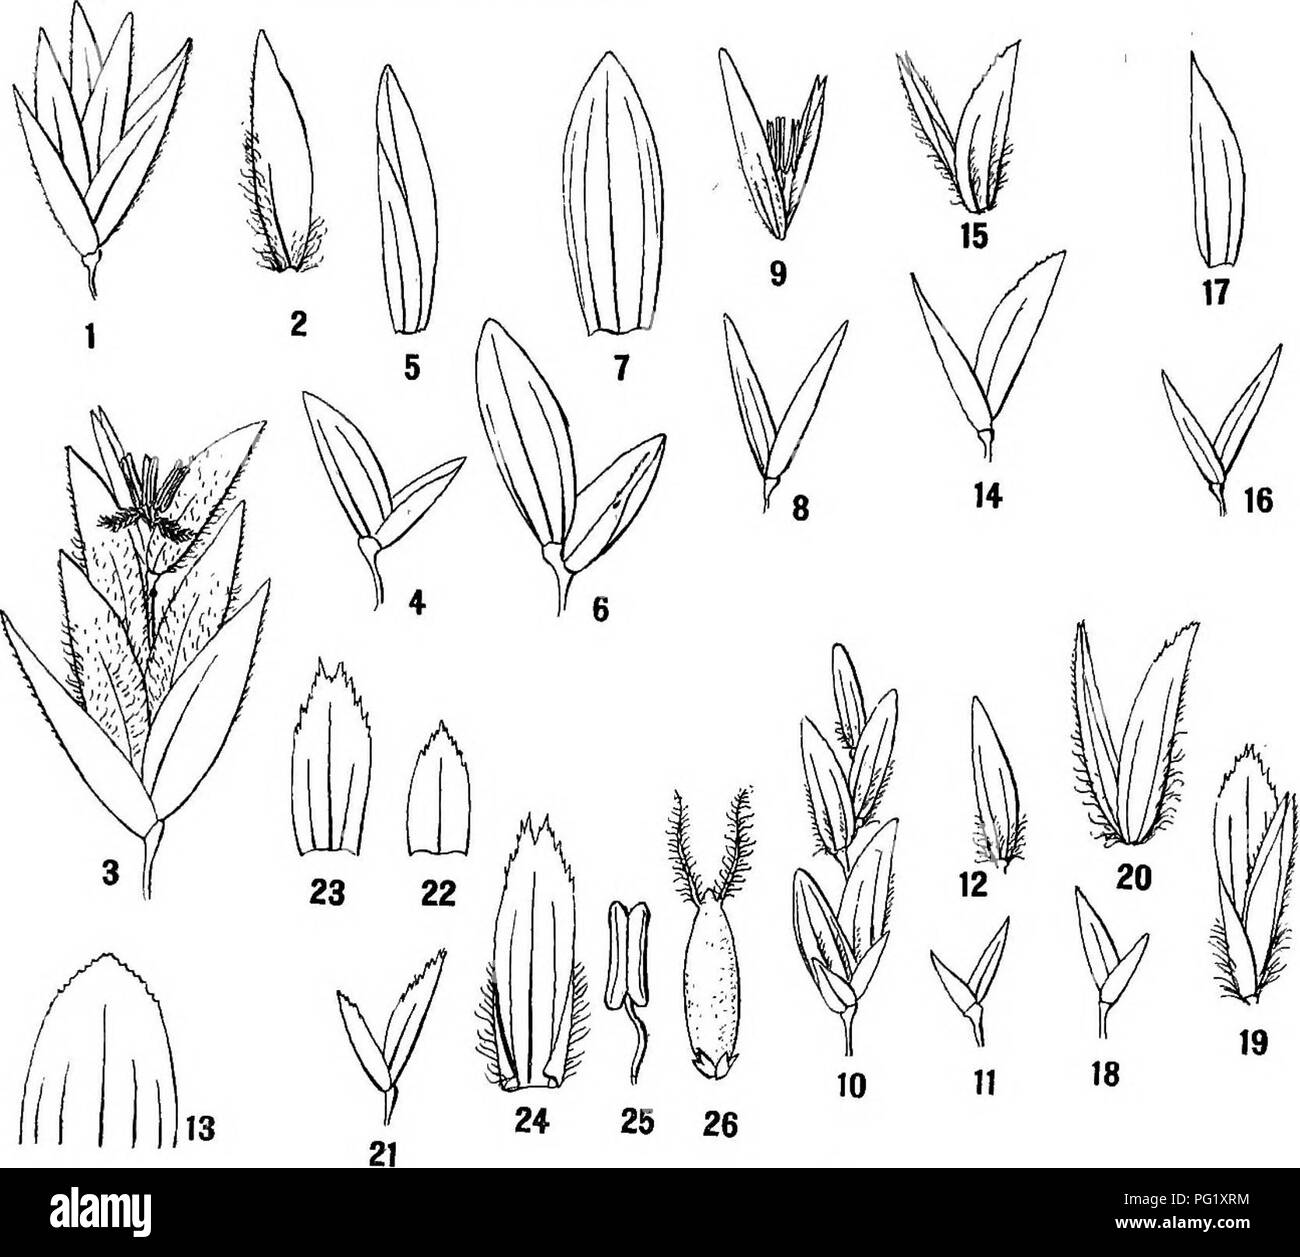 . Report of the Canadian Arctic Expedition 1913-18. Scientific expeditions. Arctic Plants: Morphology and Synonymy 5 B   The accompanying figure A: 3 I have drawn from a specimen collected in Spitzbergen by Professor A. G. Nathorst.. FiGTJKB A. 1. Poa glauca M. Vahl; spikelet. (Wollaston land). 2. Same; flowering glume, side-view 3. P. o66rmataR.Br.; spikelet. (Spitzbergen). i. Glyceriavilfoidea(,Asids.) Th.Fr.-empty glume. (Greenland). 5. Same; flowering glume, side-view. 6. G. maritima (Huds.) We • empty glumes. (Norway). 7. Same; flowering glume, dorsal view. 8. G. Vahliaria (Liebm.) Th. Fr Stock Photo